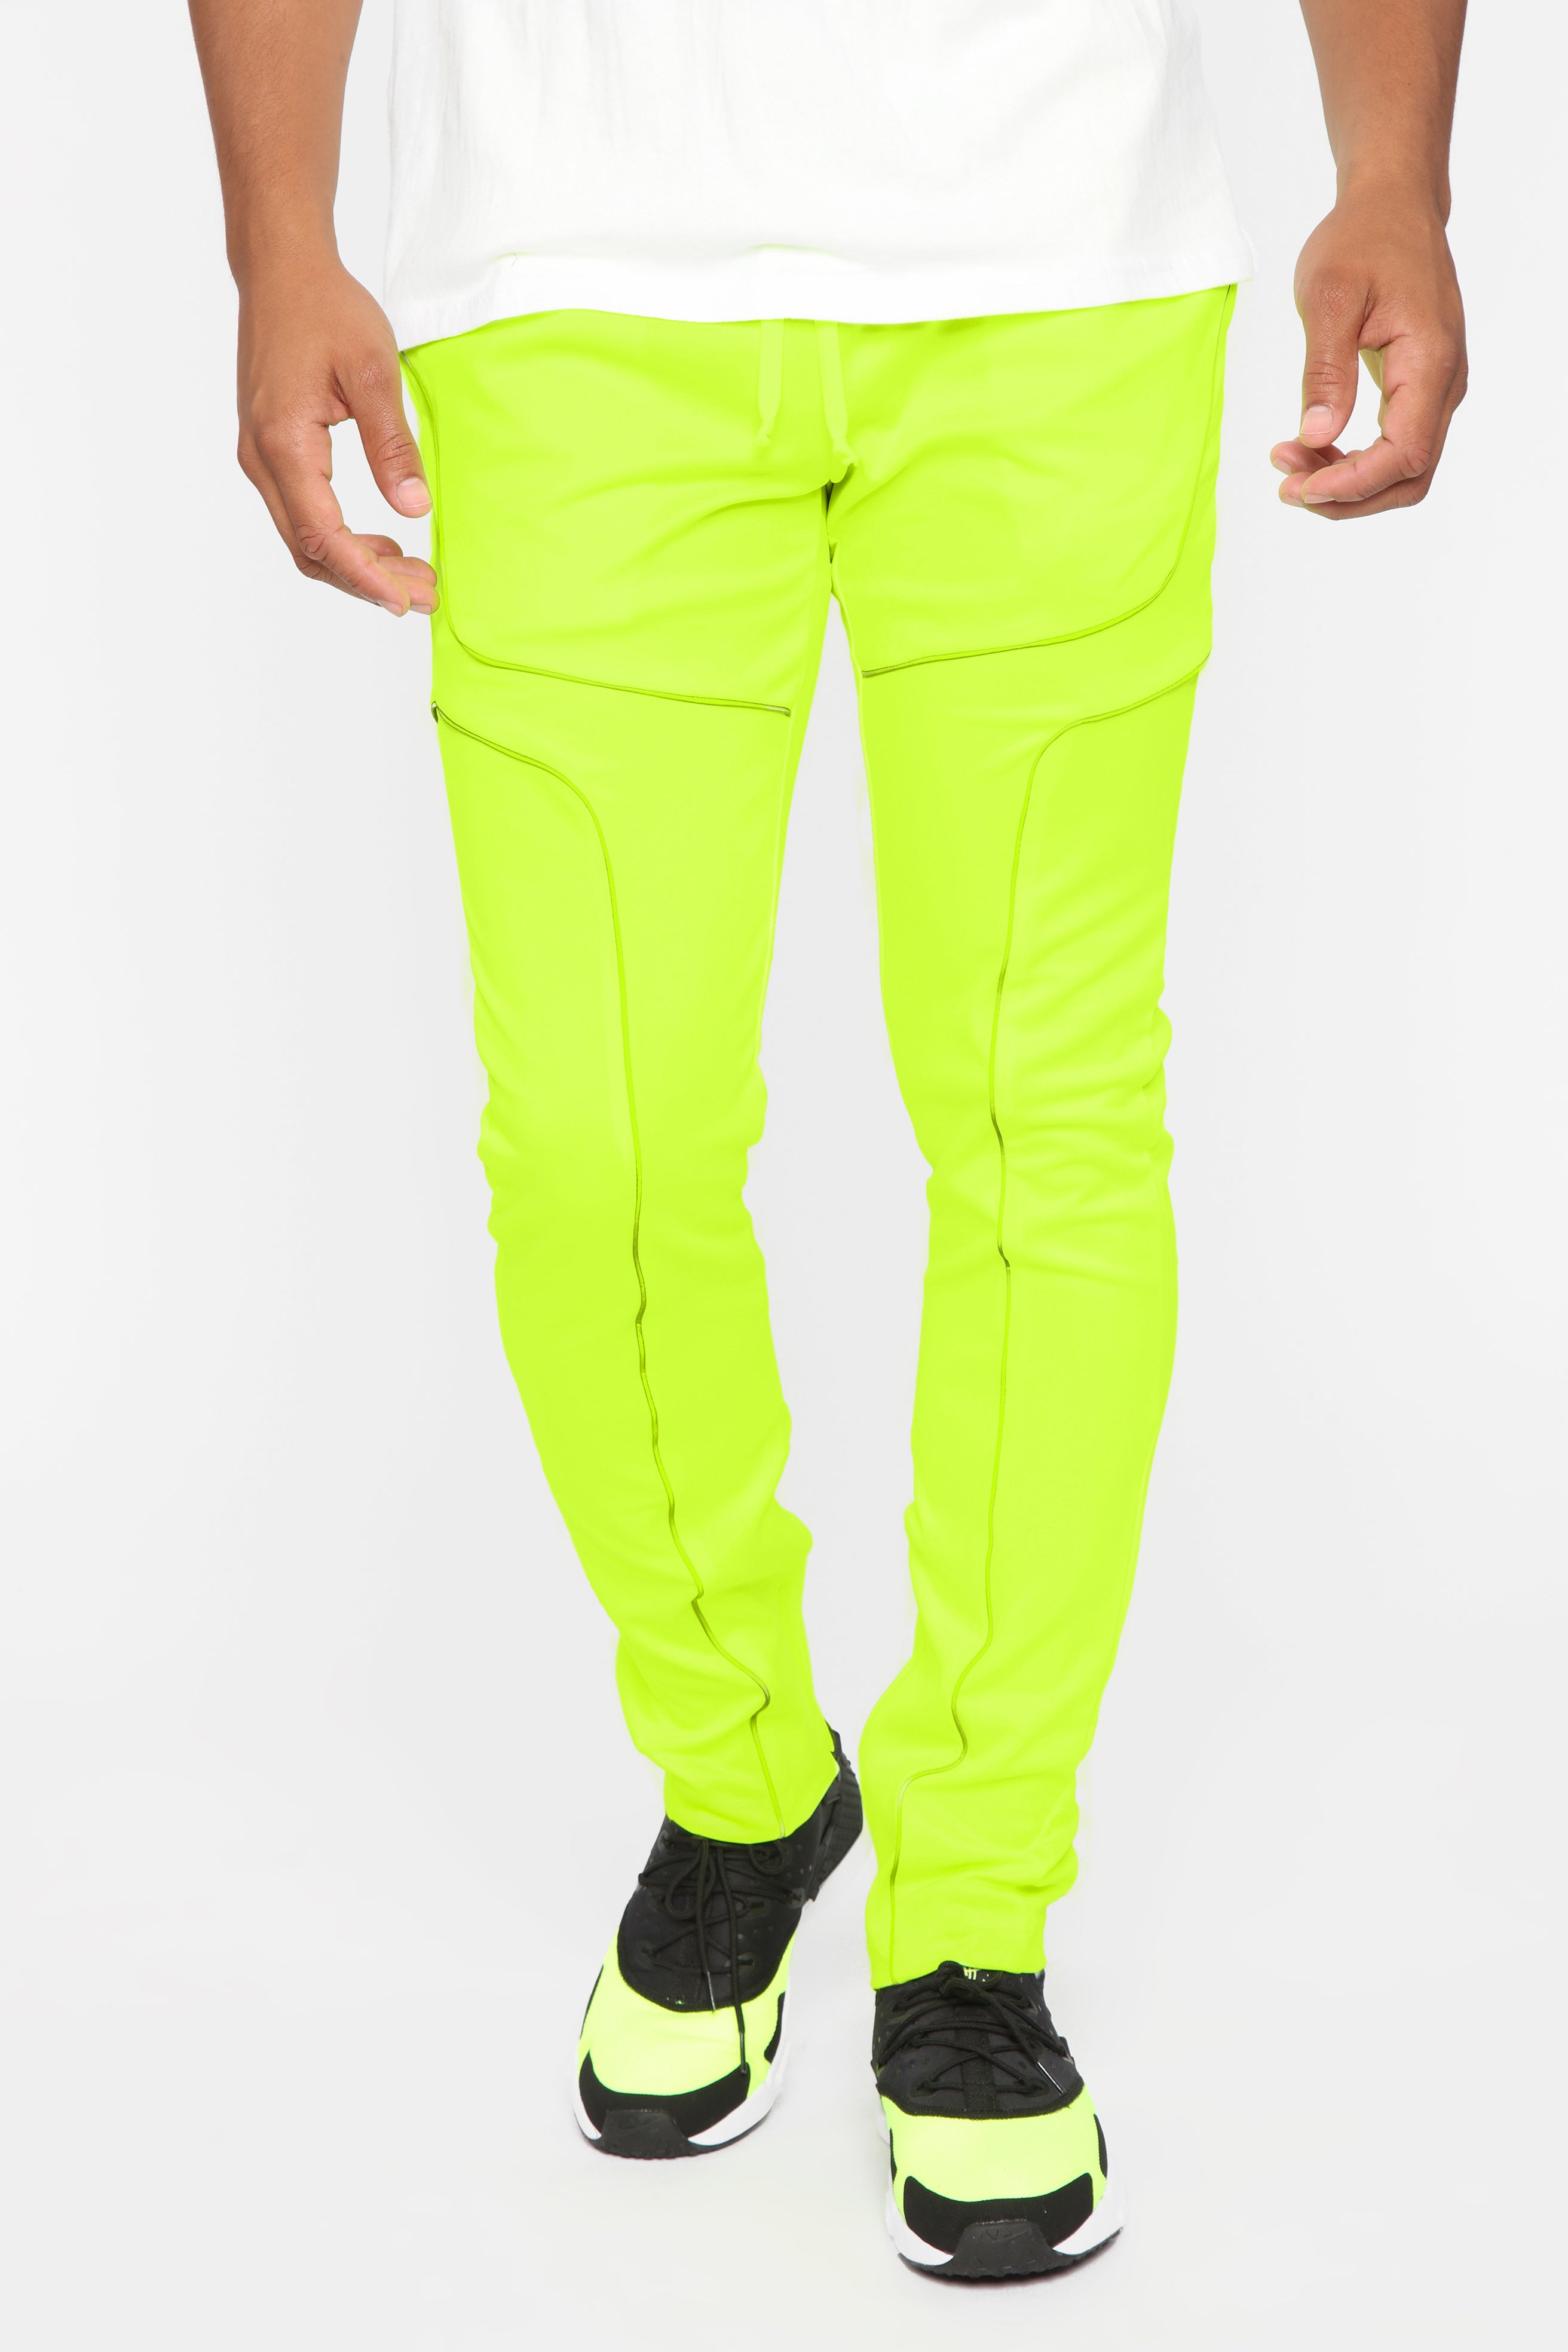 Petals by Petals and Peacocks Kindness Neon Green Track Pants